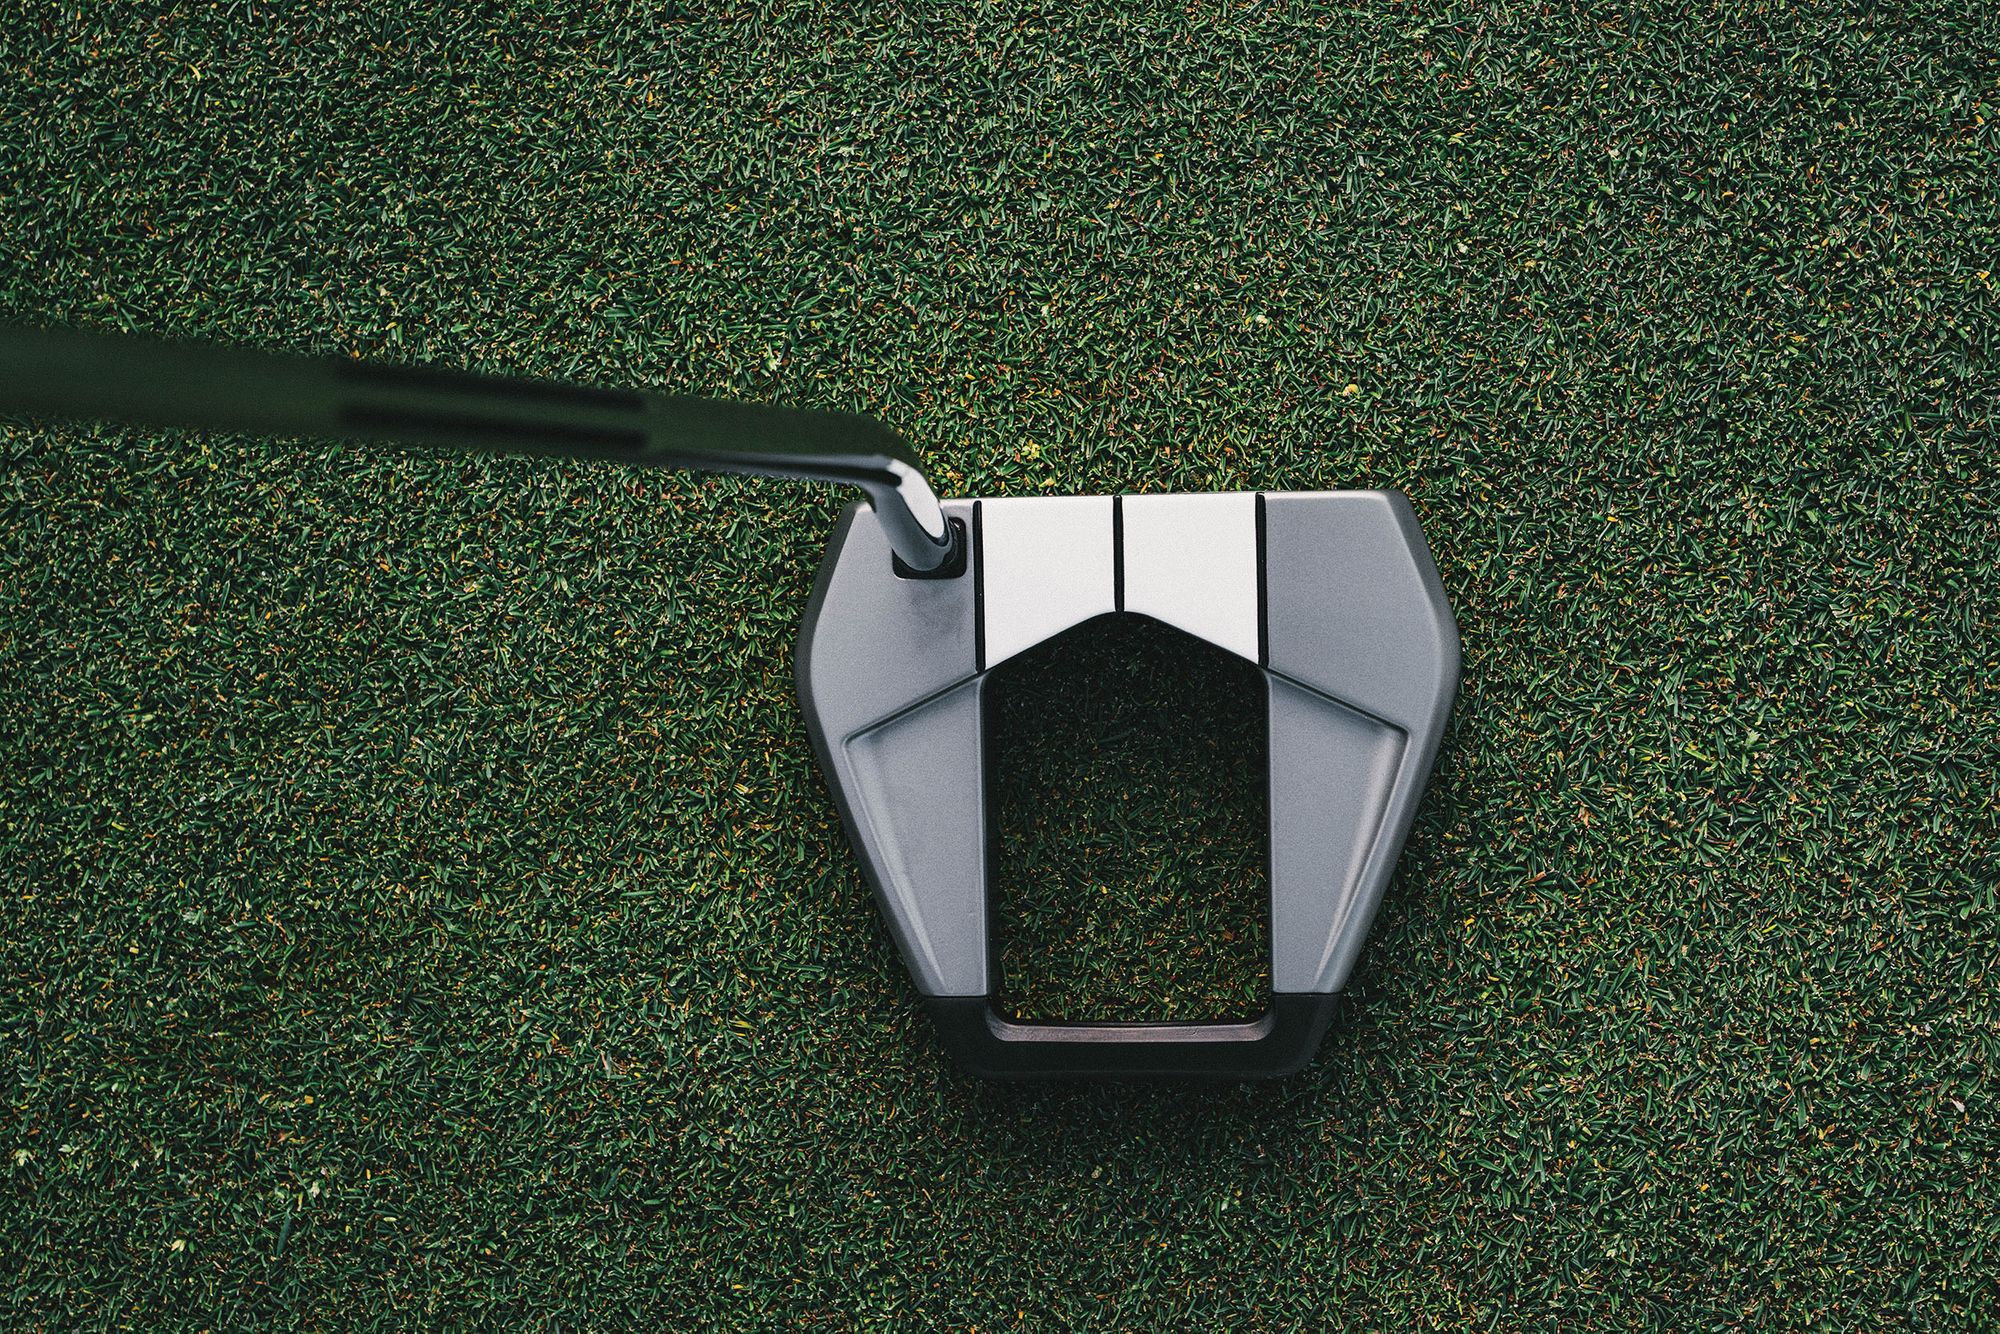 Taylormade Spider S Putter & How it's different to the Spider X Putter 